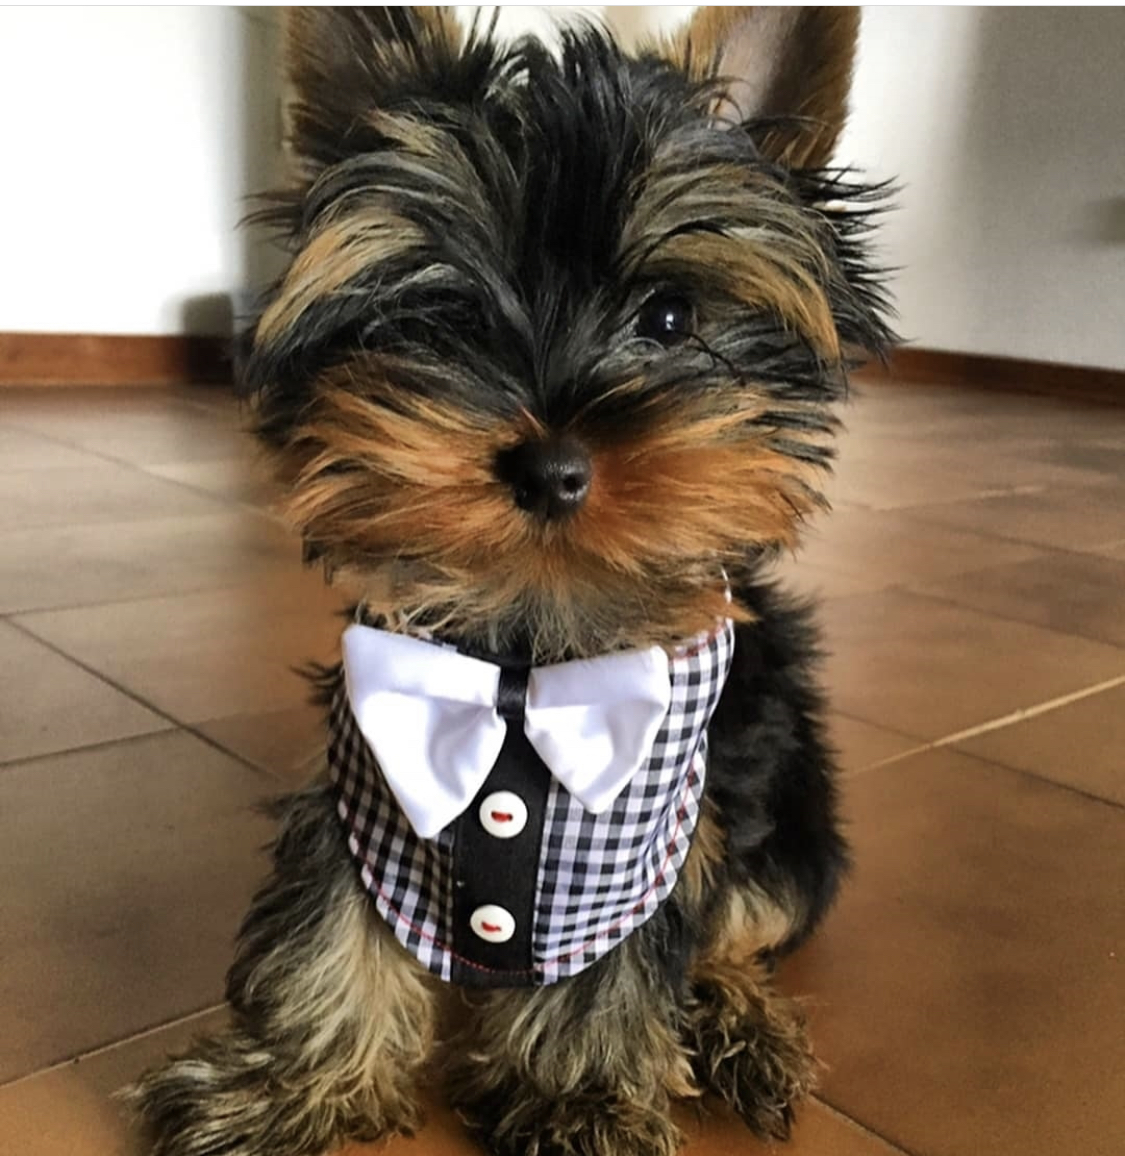 Yorkshire Terrier sitting on the floor wearing a checkered top